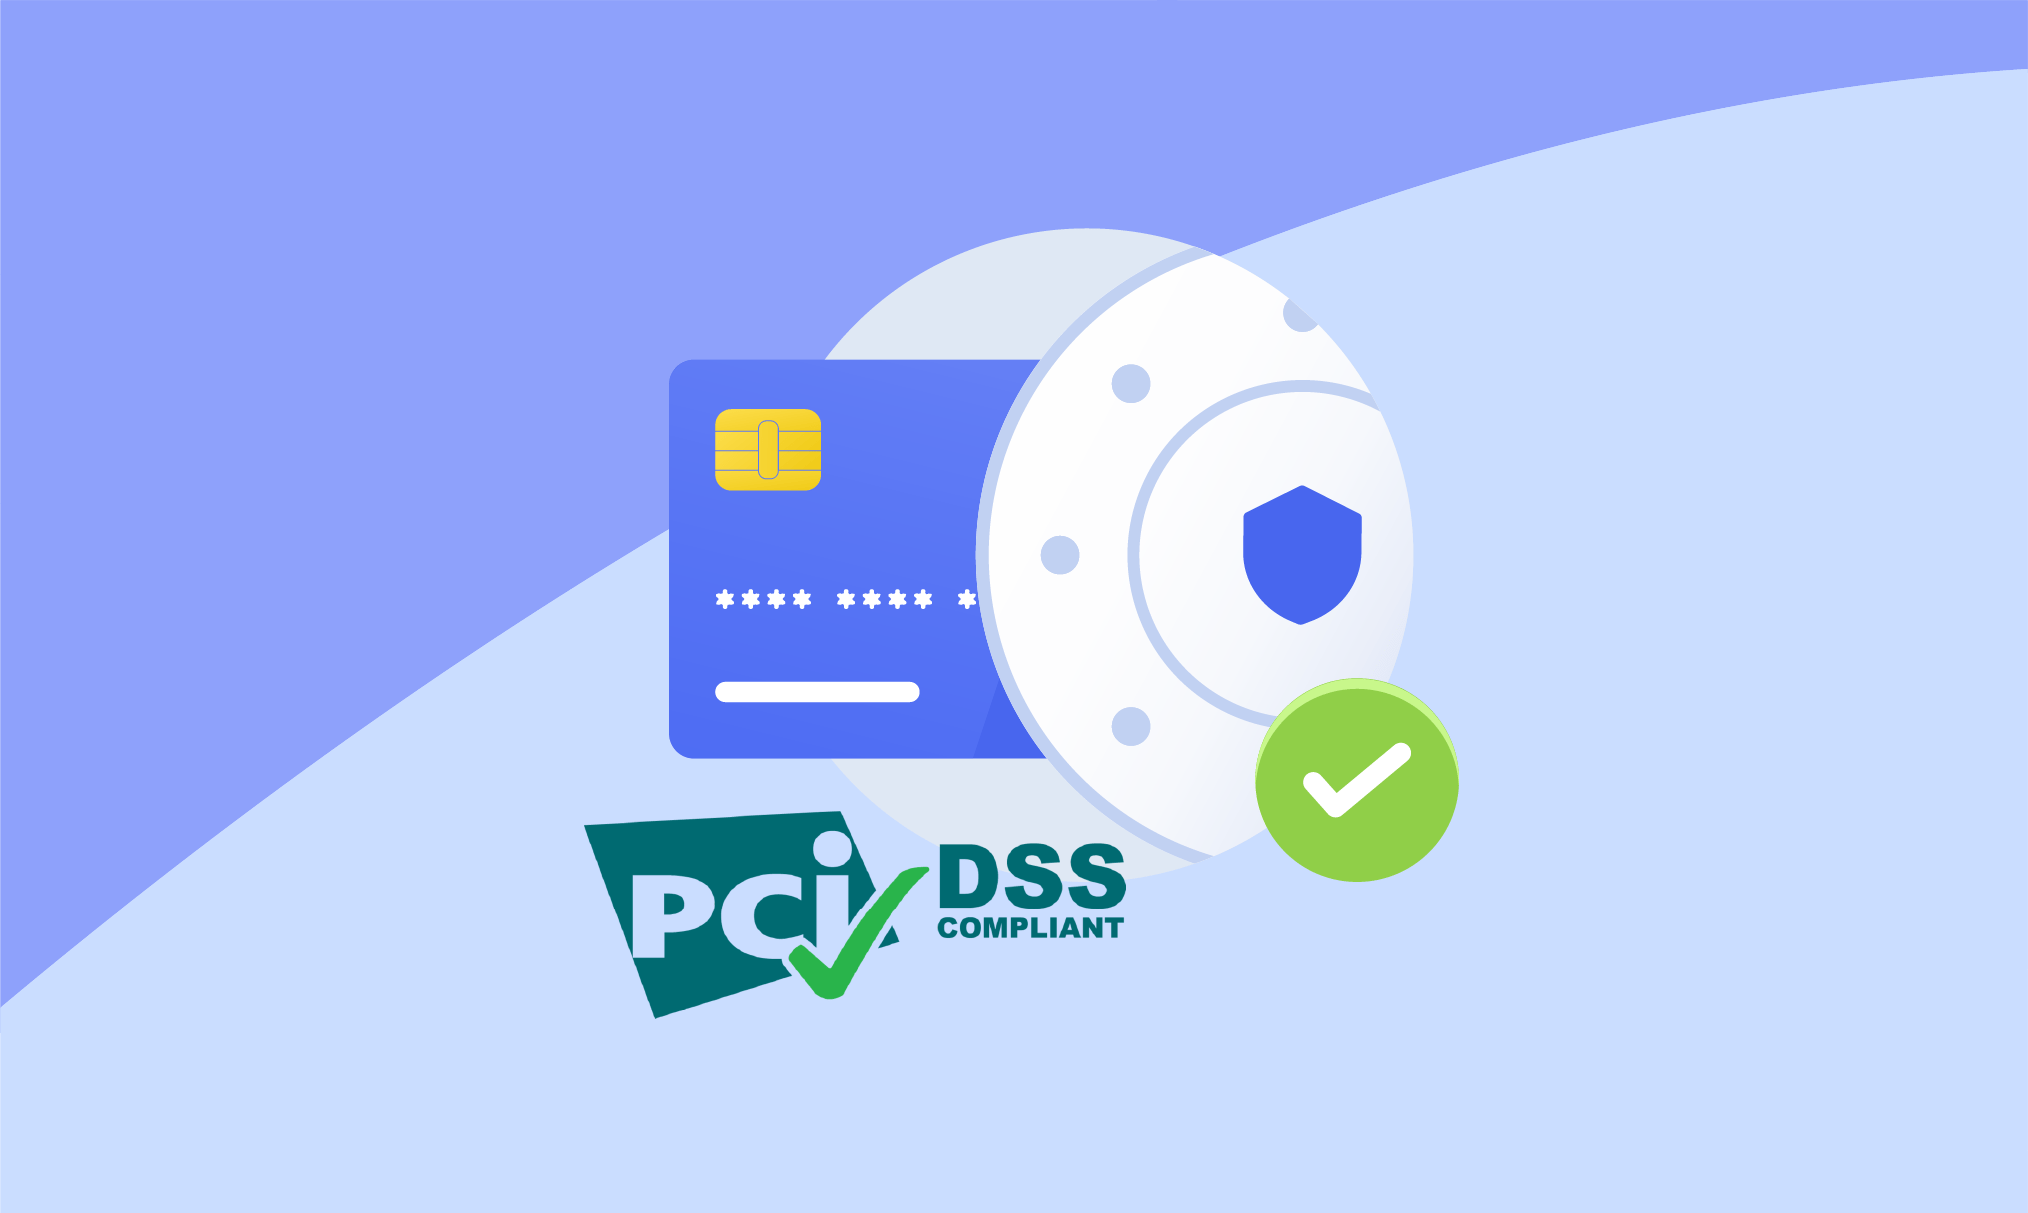 4 Major Benefits Of PCI DSS Compliance